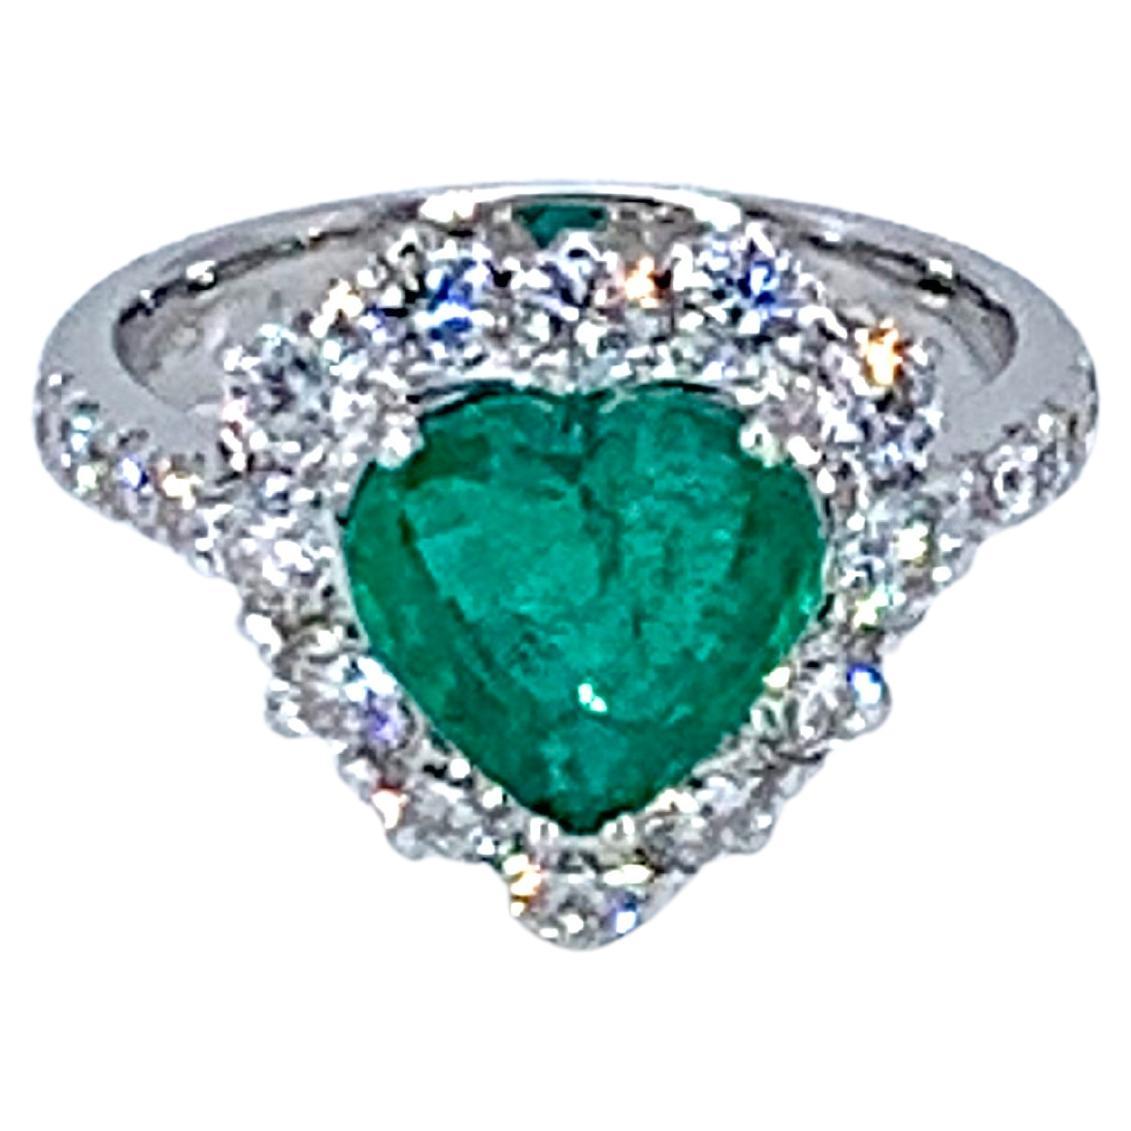 Contemporary 7.32 Carat Emerald & 3.75 Carat Diamond Heart Shaped Ring For Sale